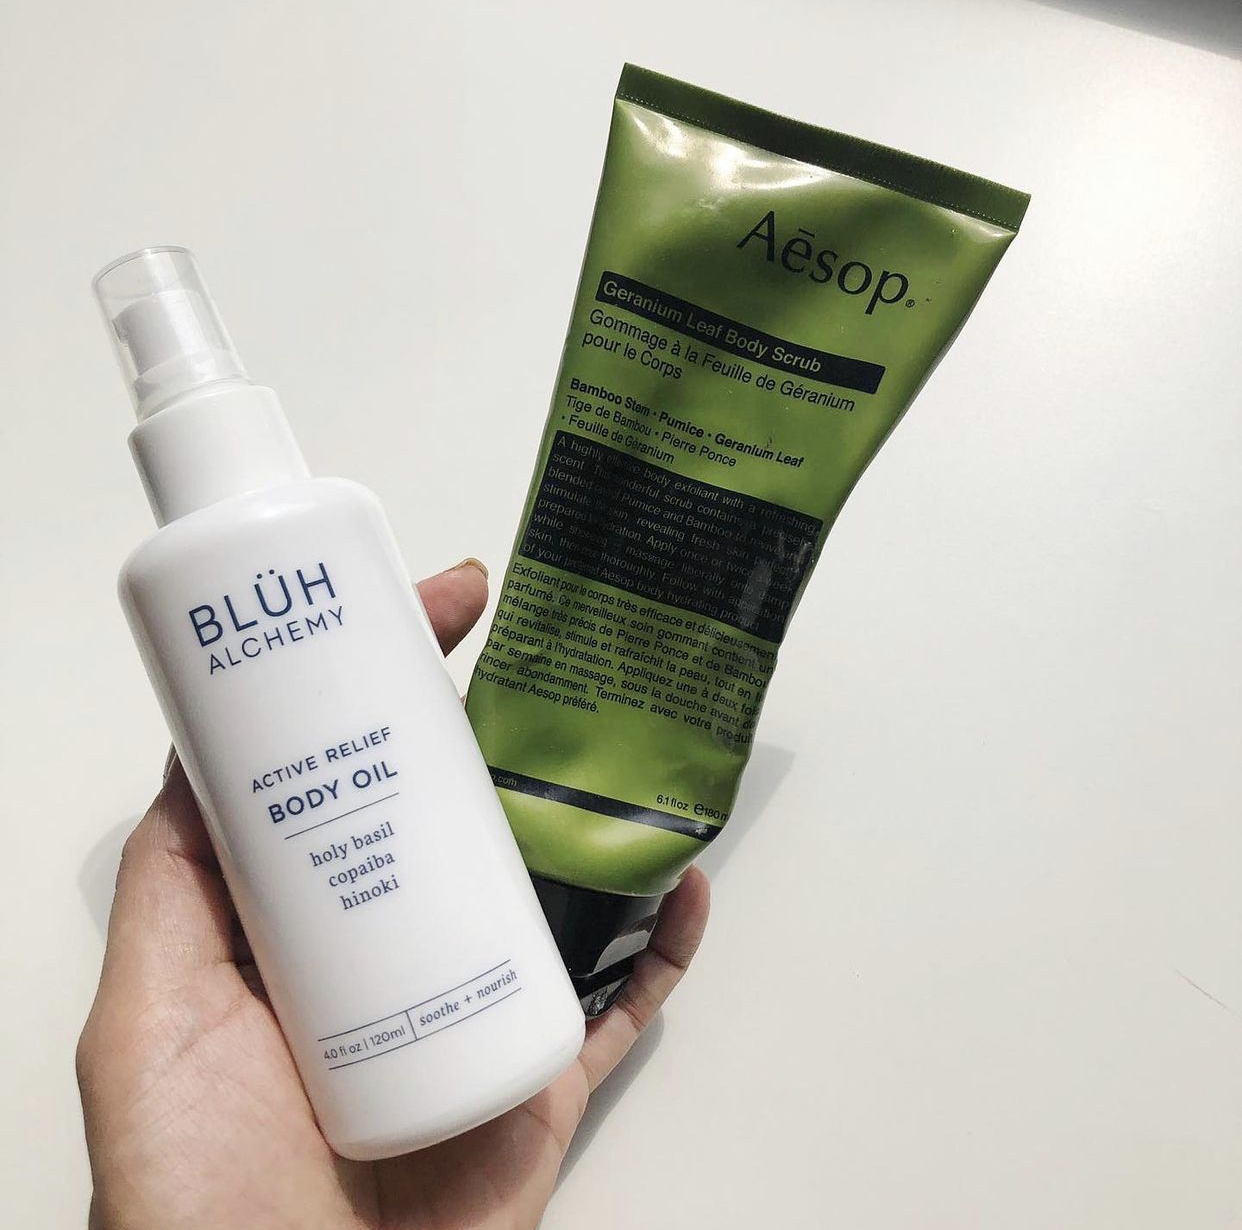 Product review: Bluh Alchemy’s Active Relief Body Oil and Aesop’s Geranium Leaf body scrub